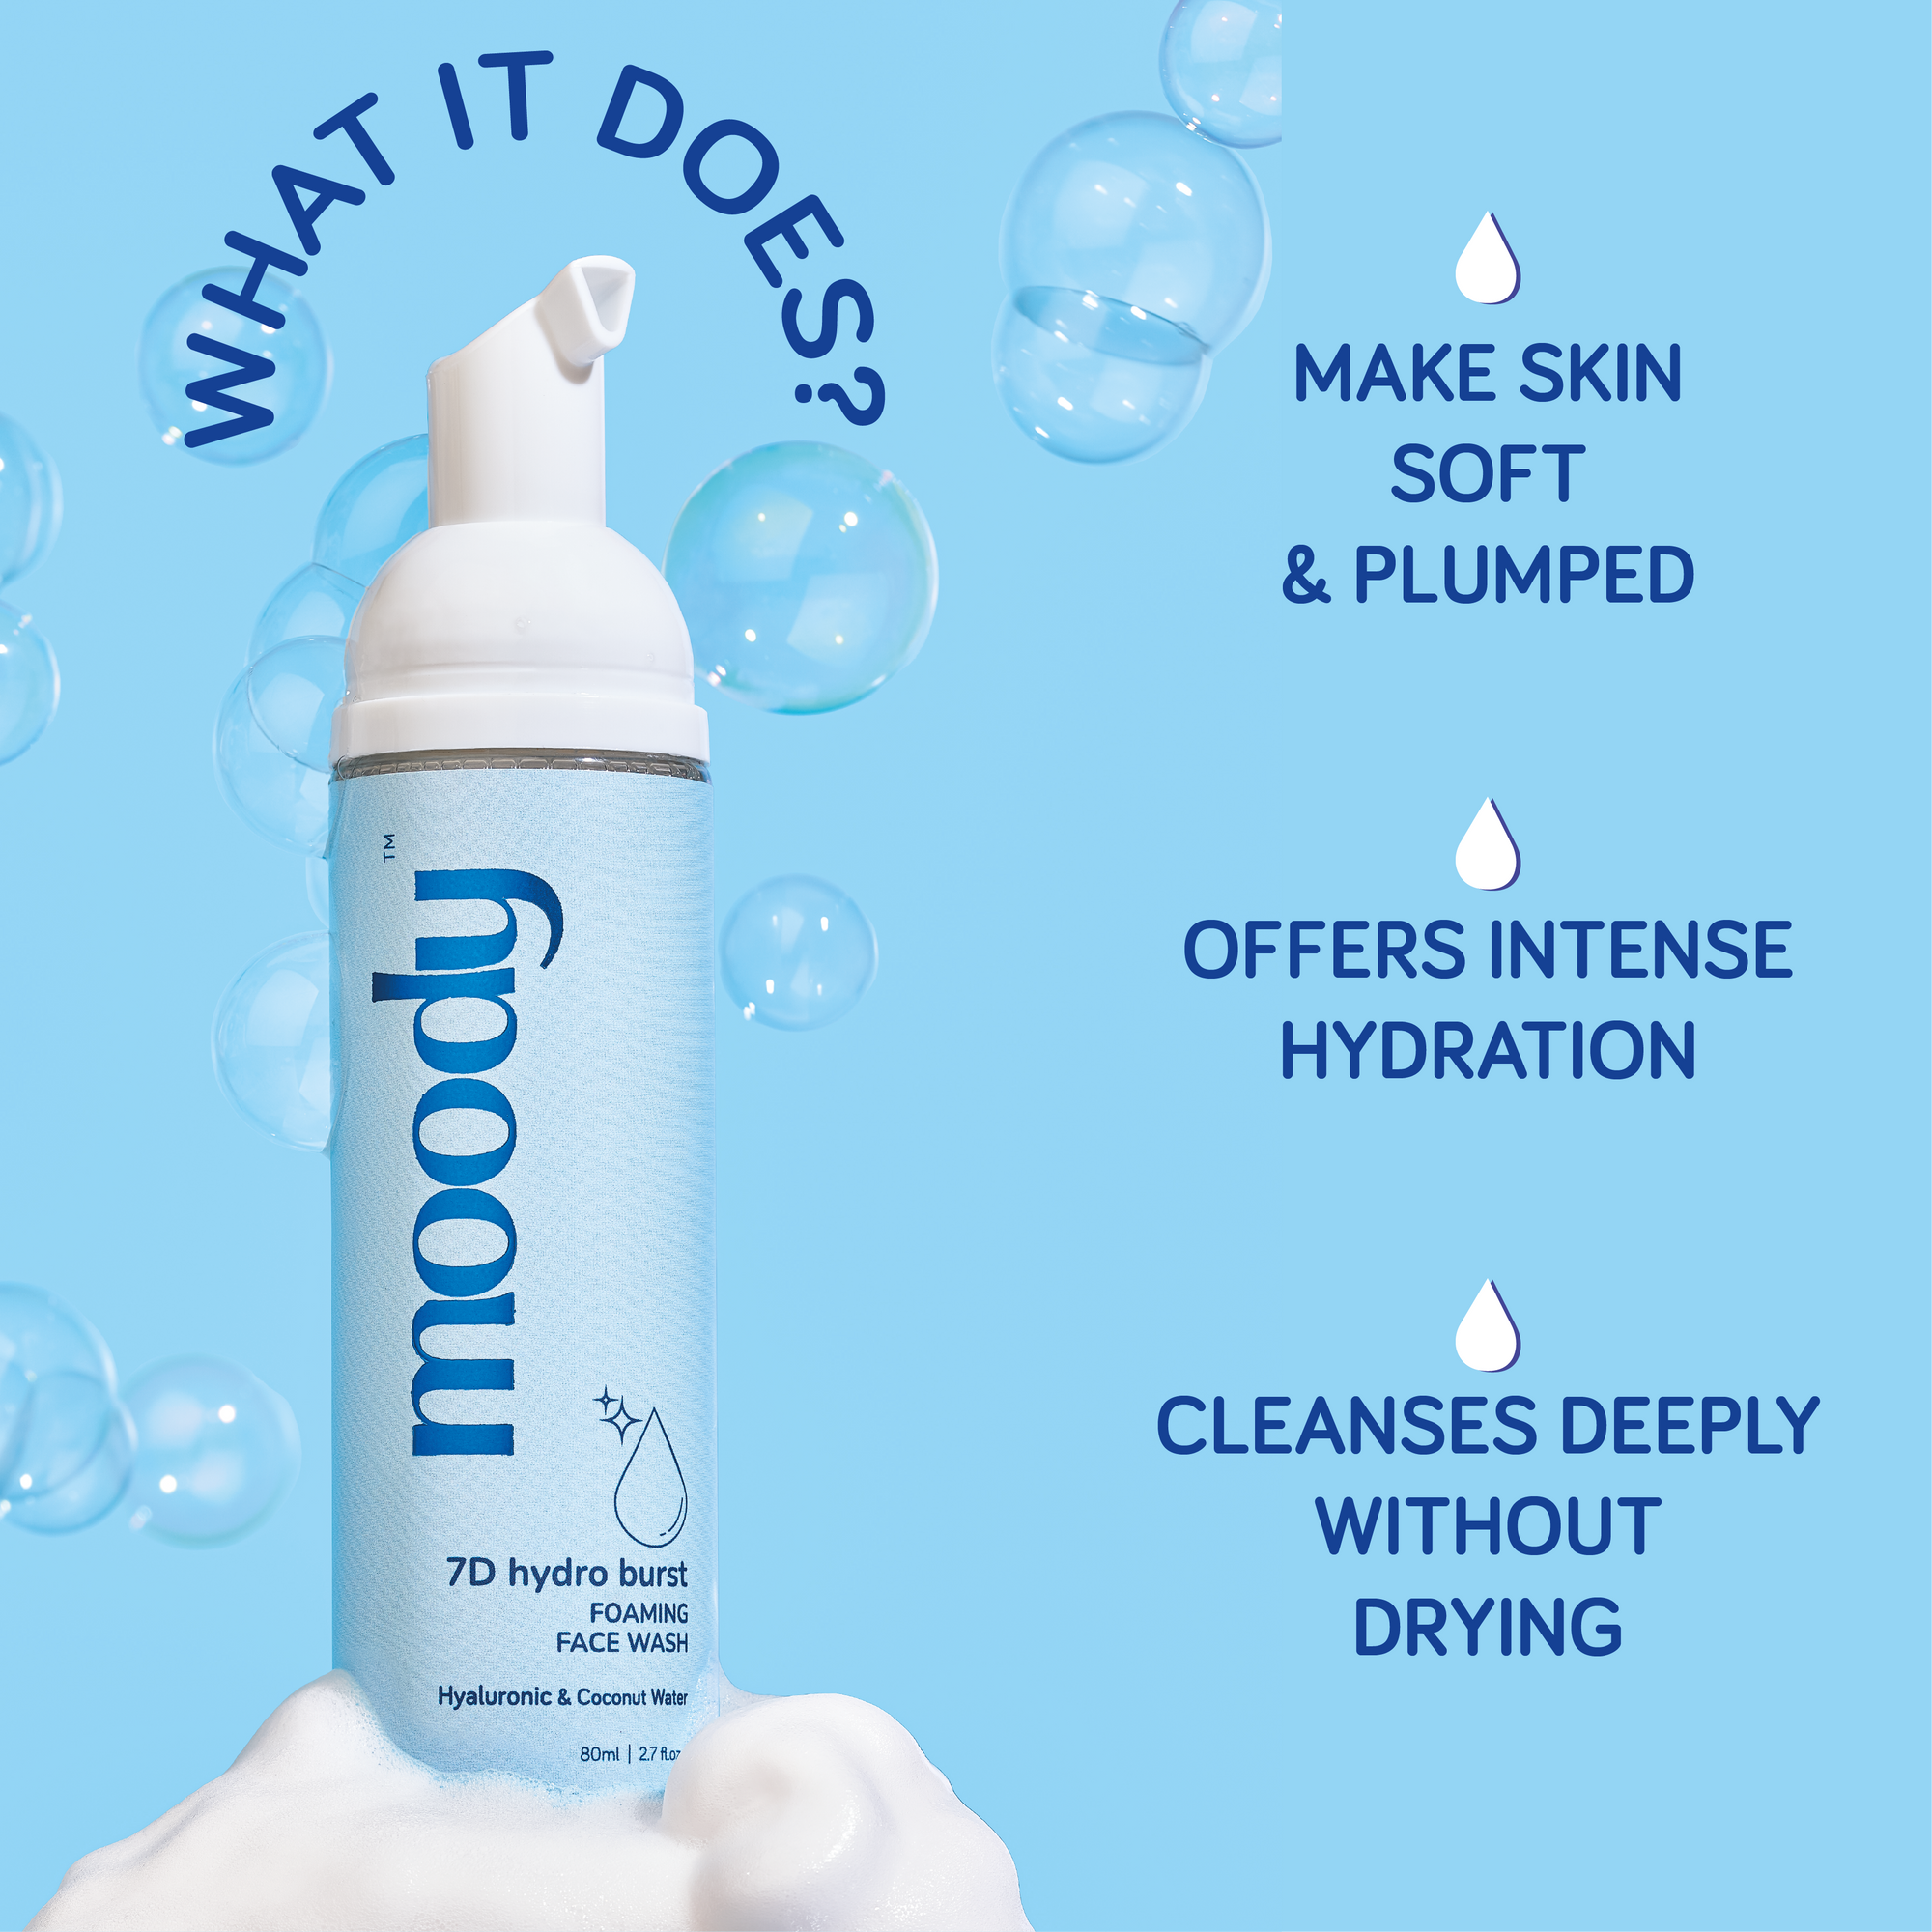 *Hydro Burst Foaming Face Wash with 2% Hyaluronic Acid